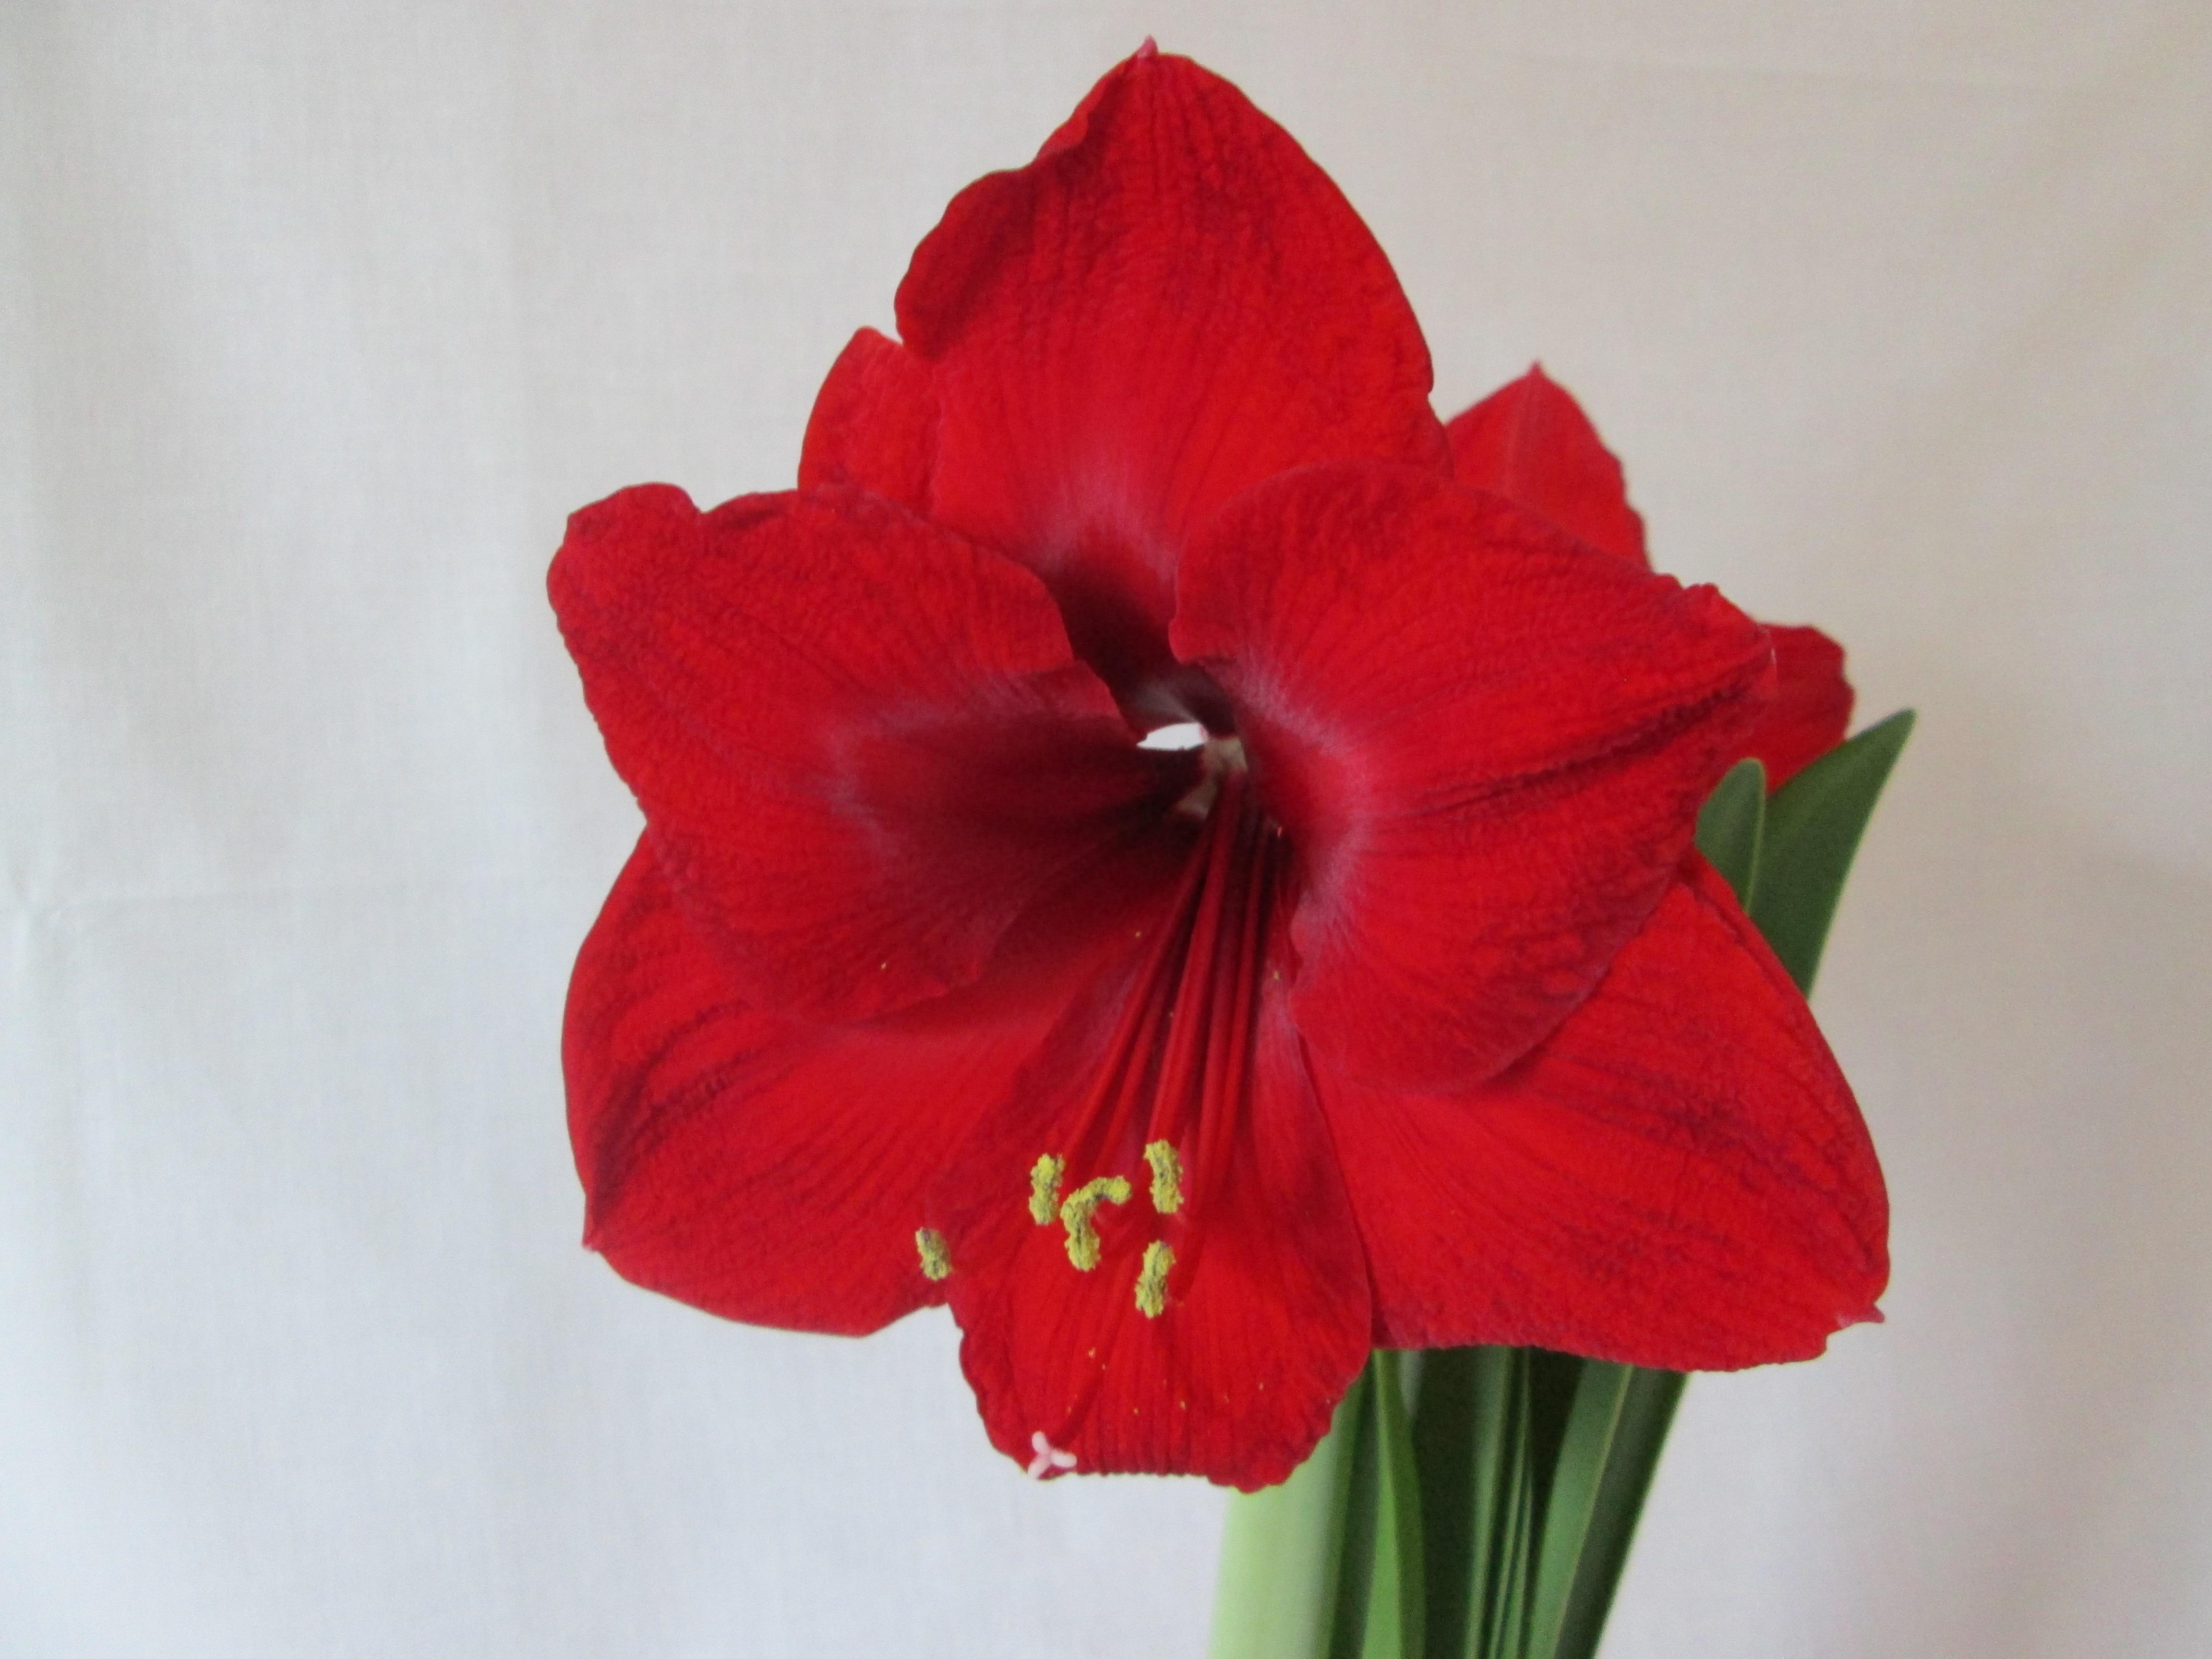 Hippeastrum Holland 'Red Lion' - Amaryllis (Shipping begins Oct. 2020) from Leo Berbee Bulb Company